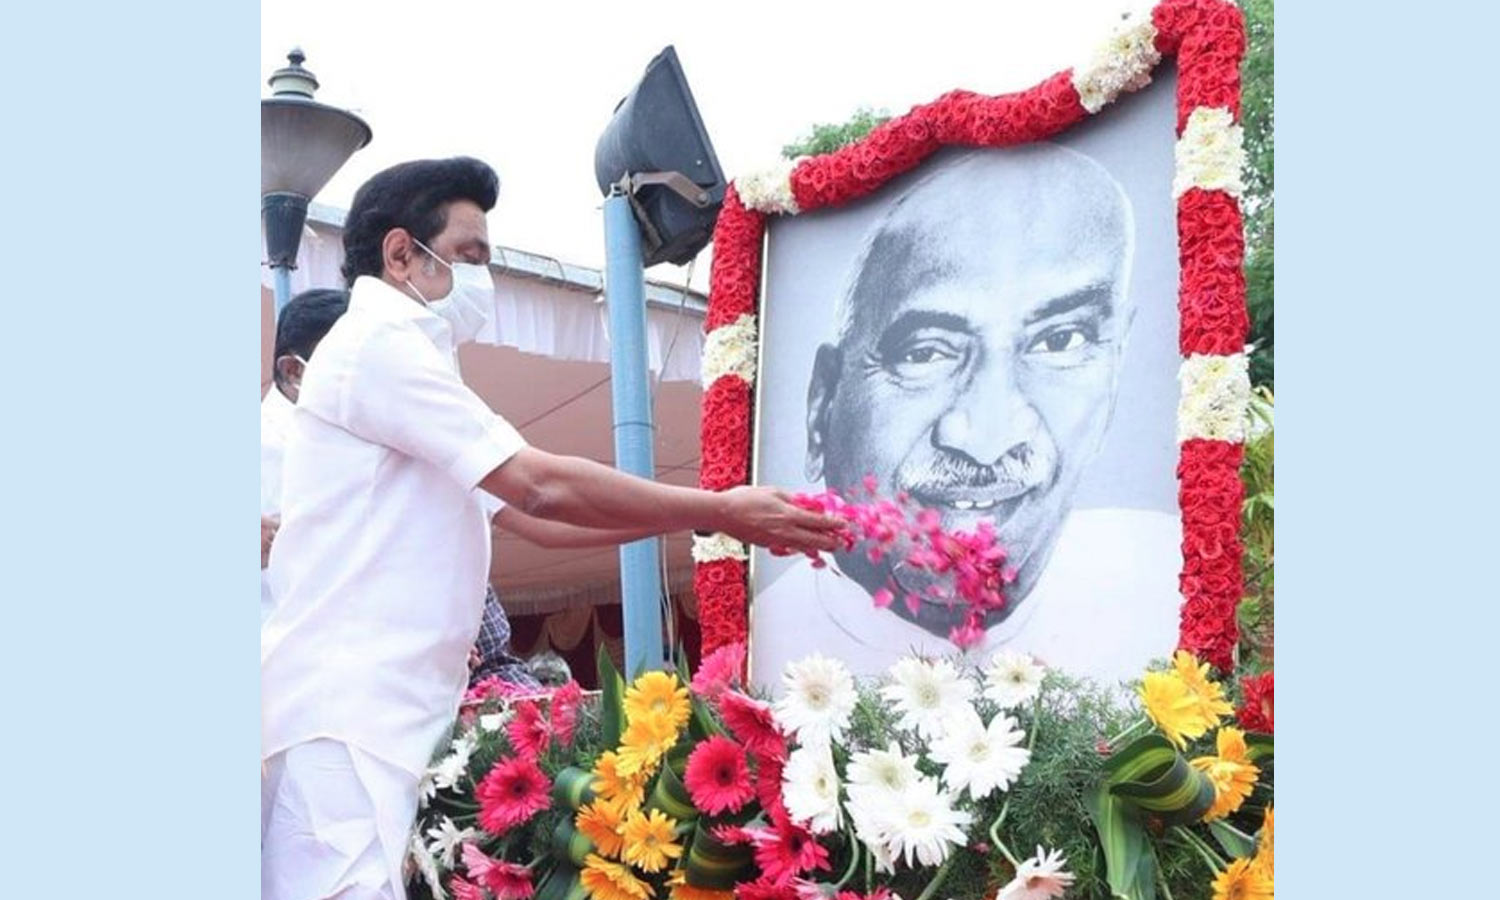 Chief Minister Stalin showered floral tributes on the occasion of Kamaraj's birthday!!